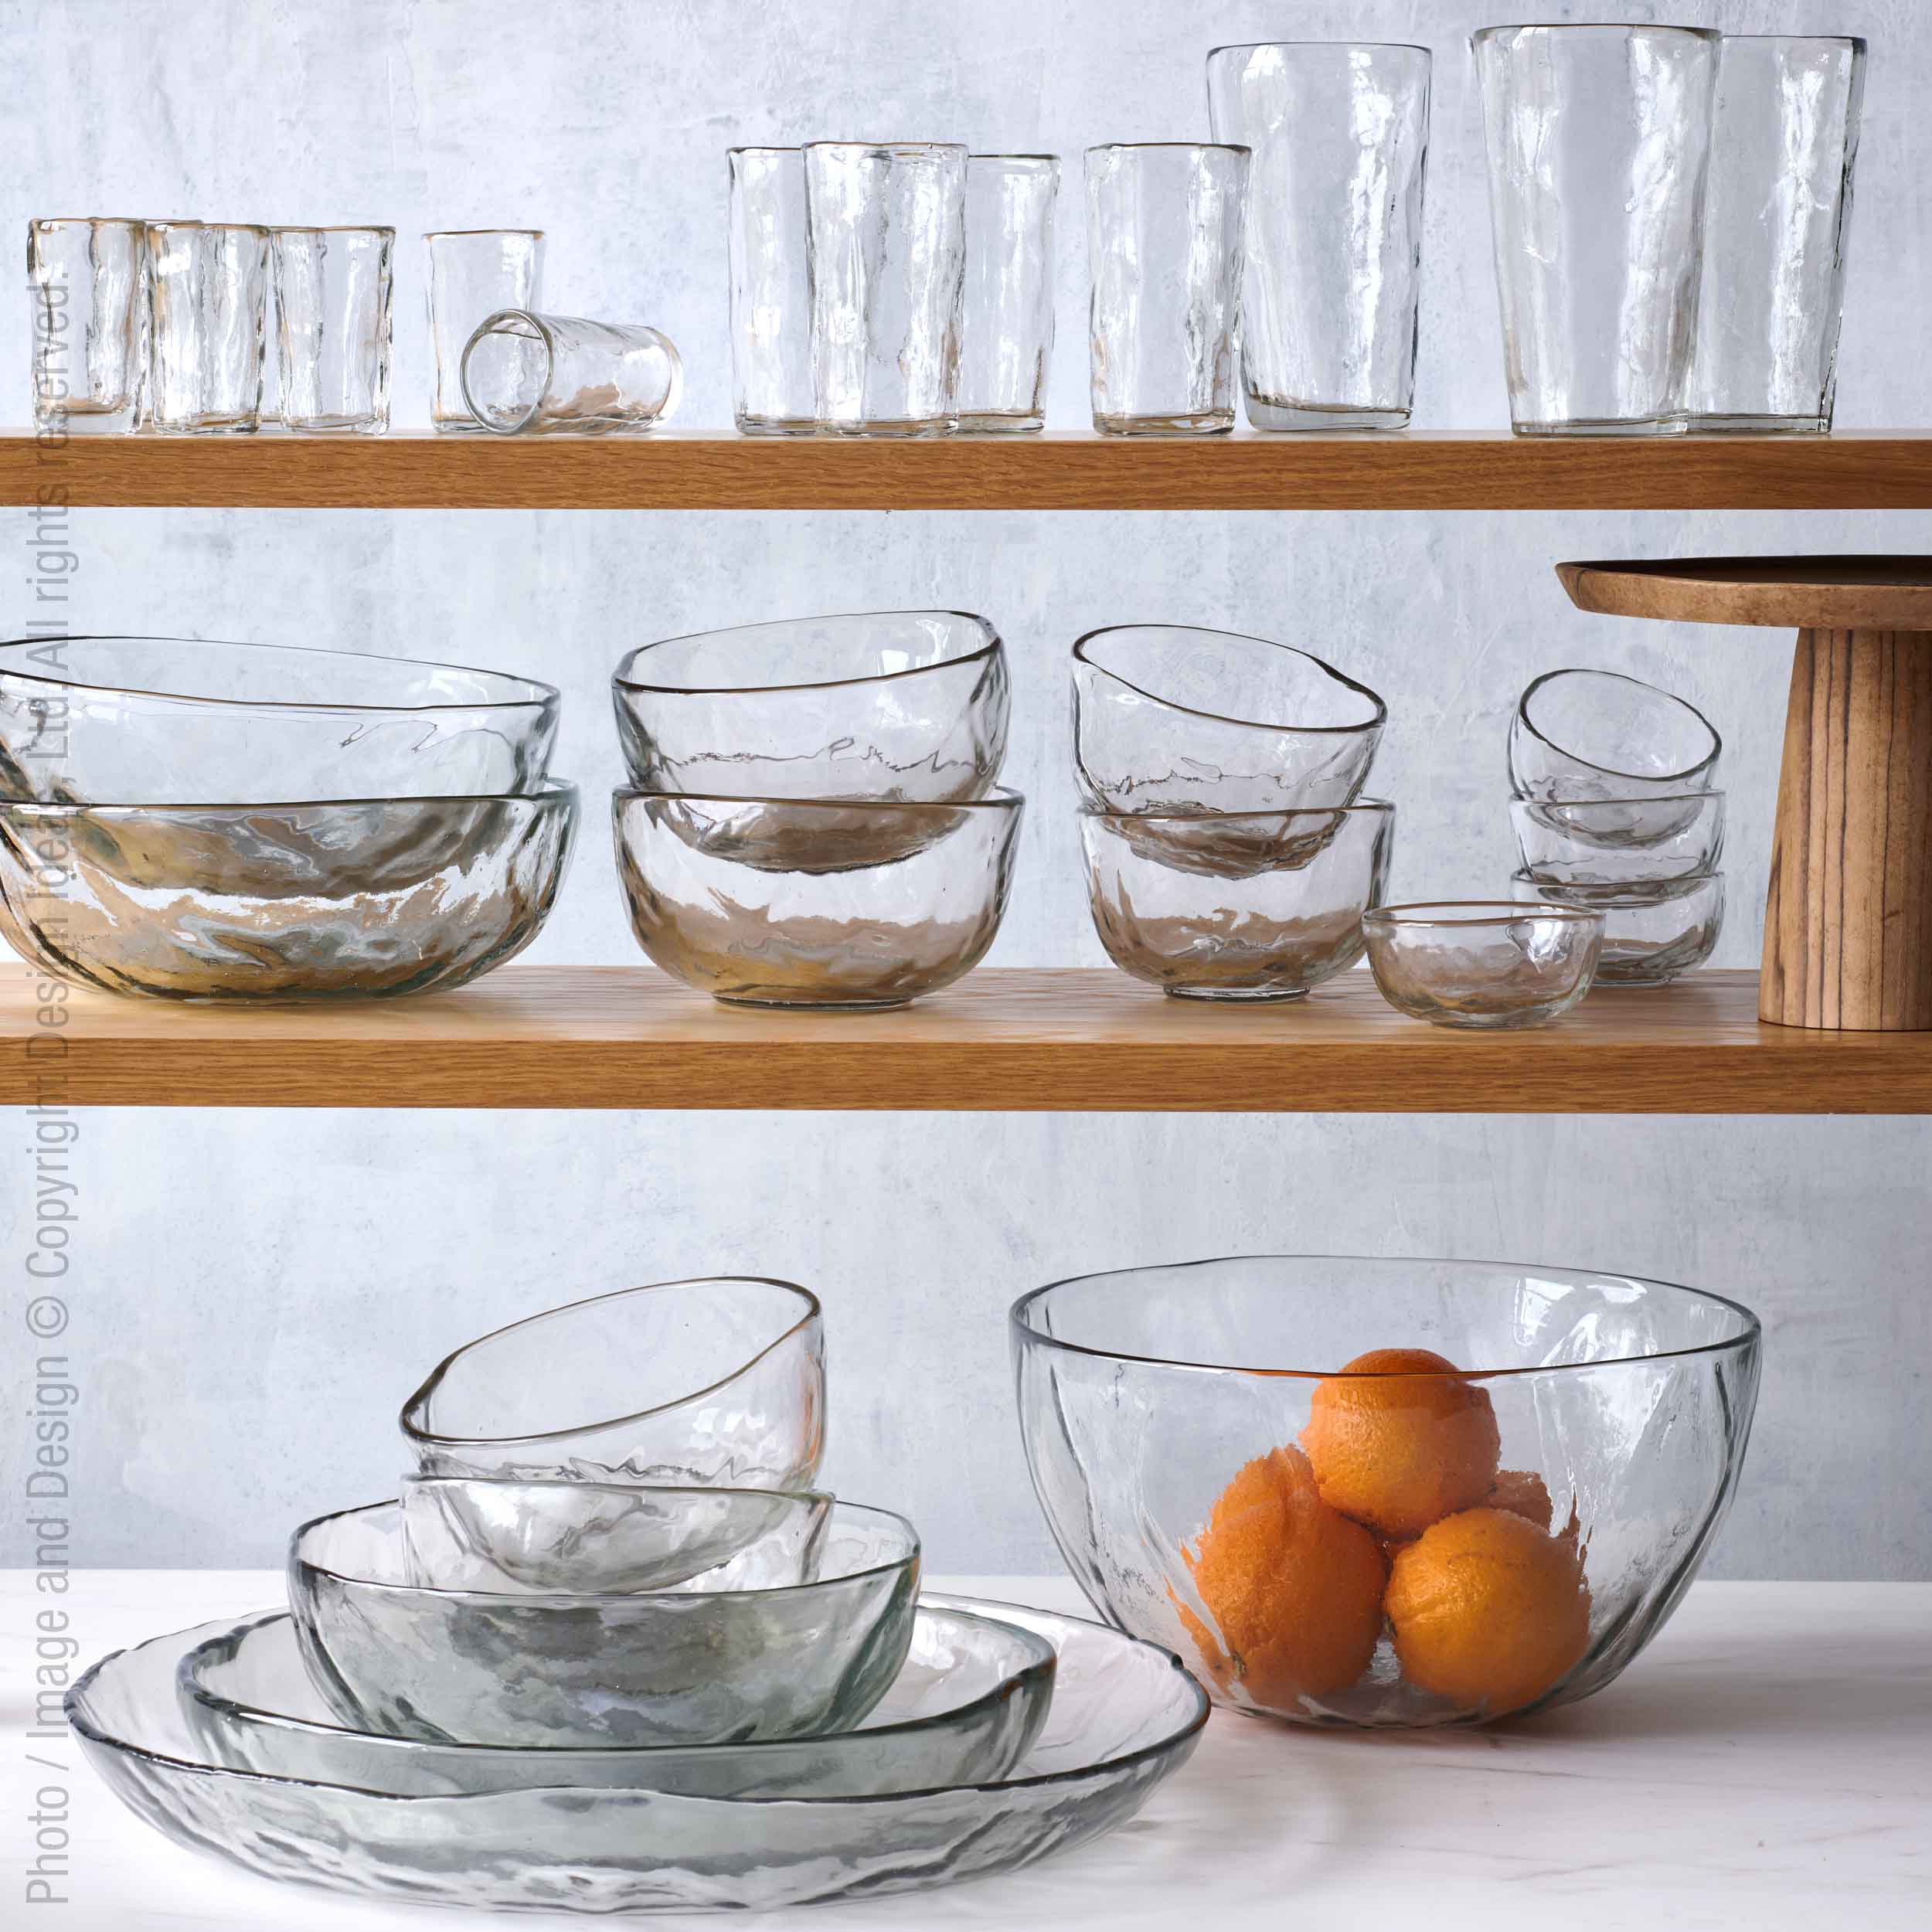 Wabisabi™ decorative bowl (16in) - Clear | Image 7 | Premium Bowl from the Wabisabi collection | made with Glass for long lasting use | texxture